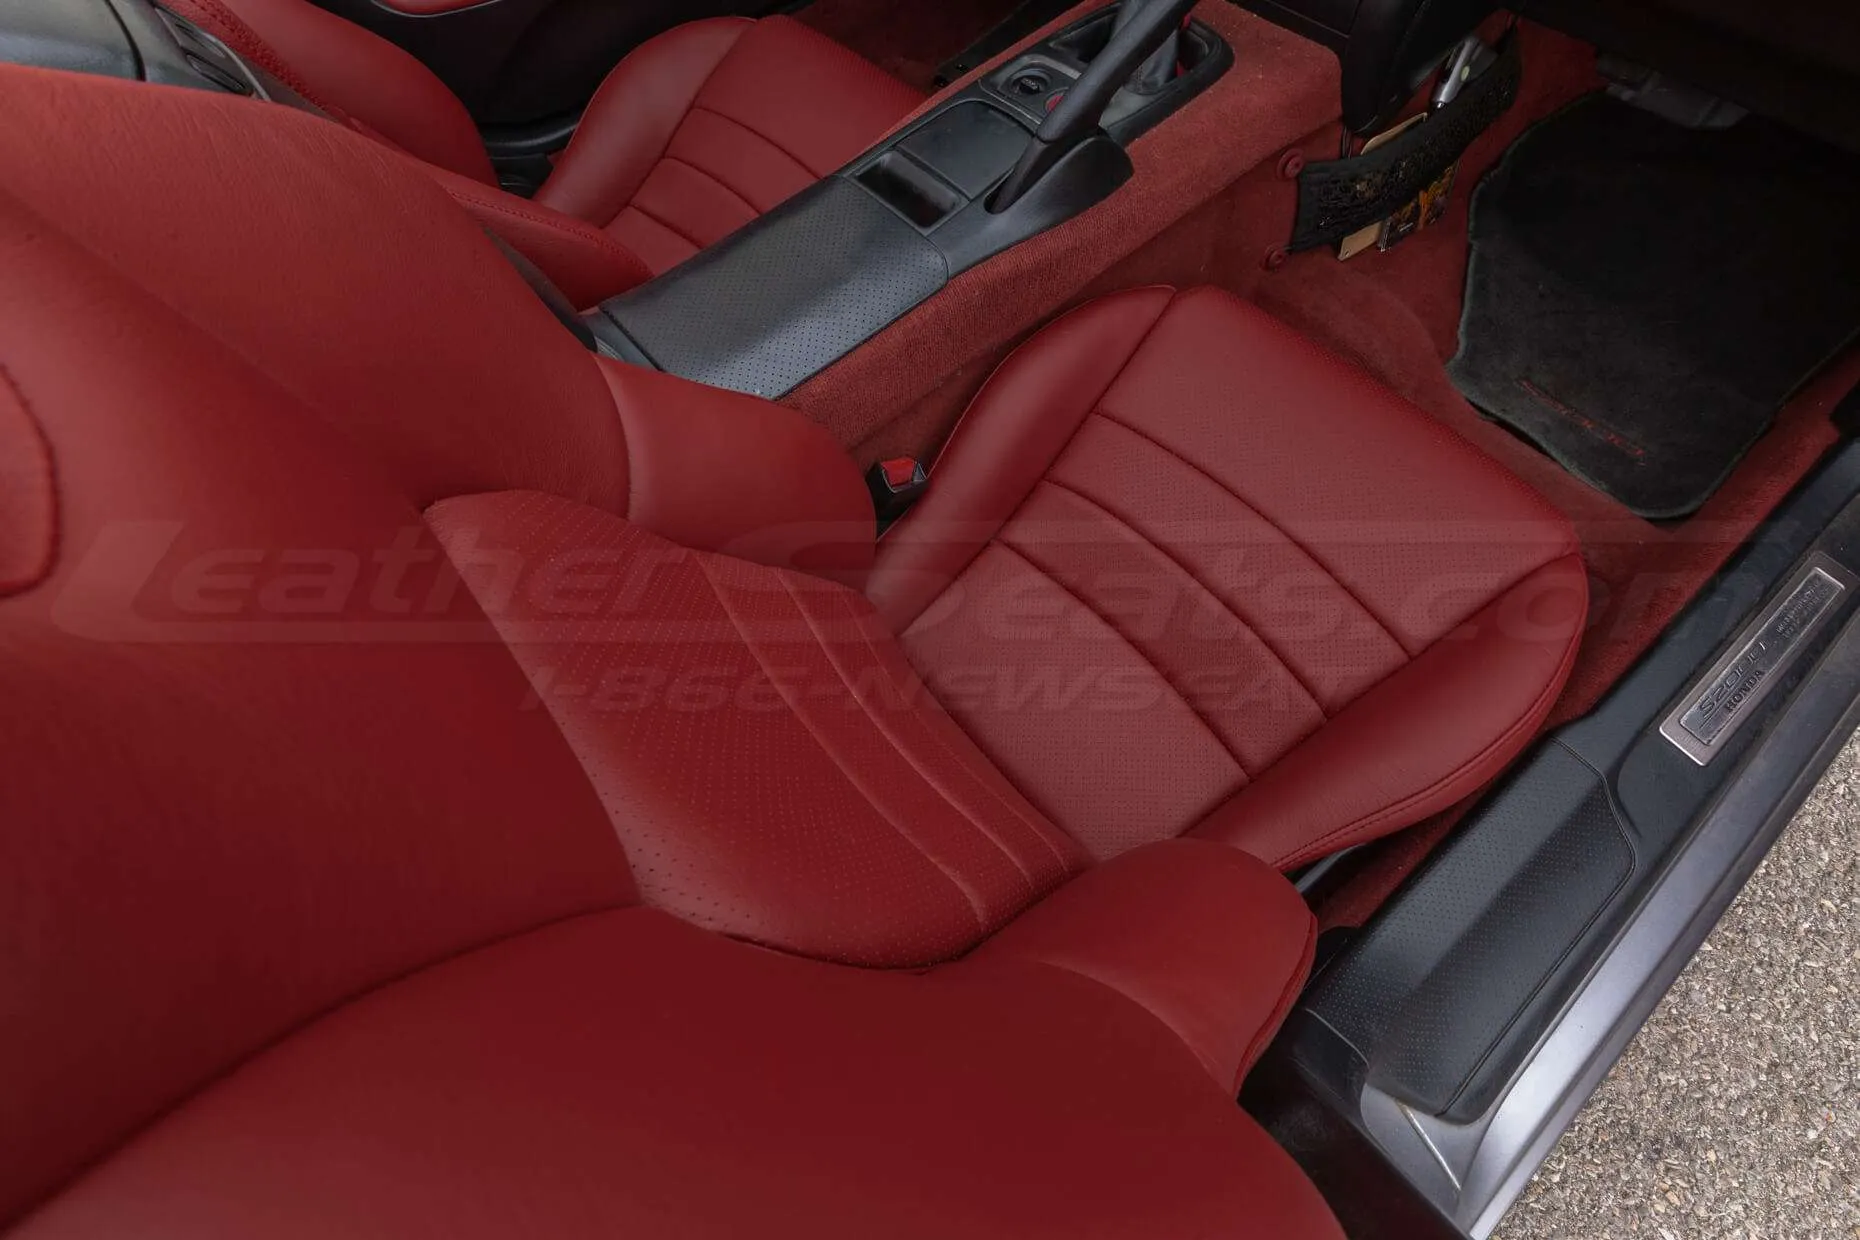 Honda S2000 Cardinal Leather Seats - Installed - Top-down view of passenger seat